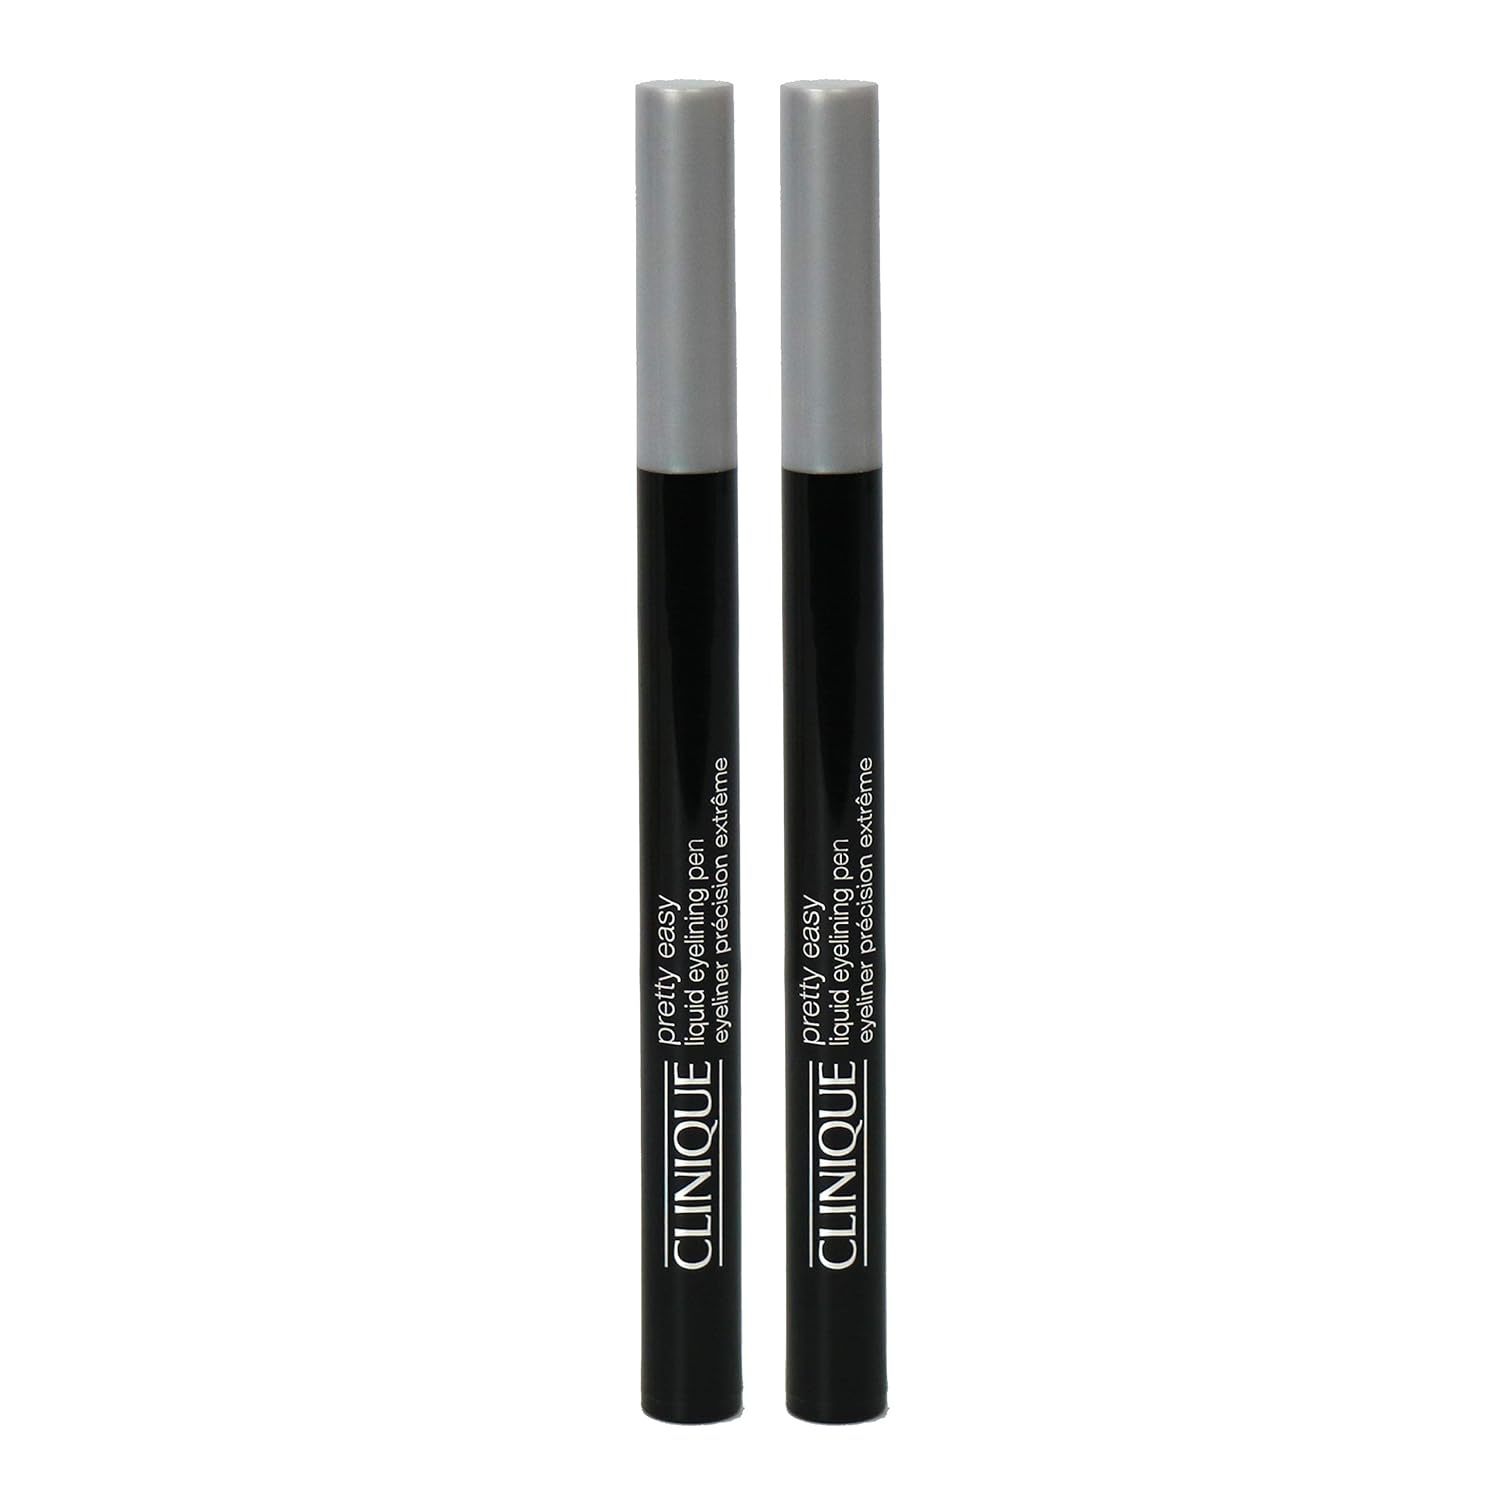 Pack of 2 x Clinique Pretty Easy Liquid Eyelining Pen Color Black, 0.01  each Travel Size, Unboxed